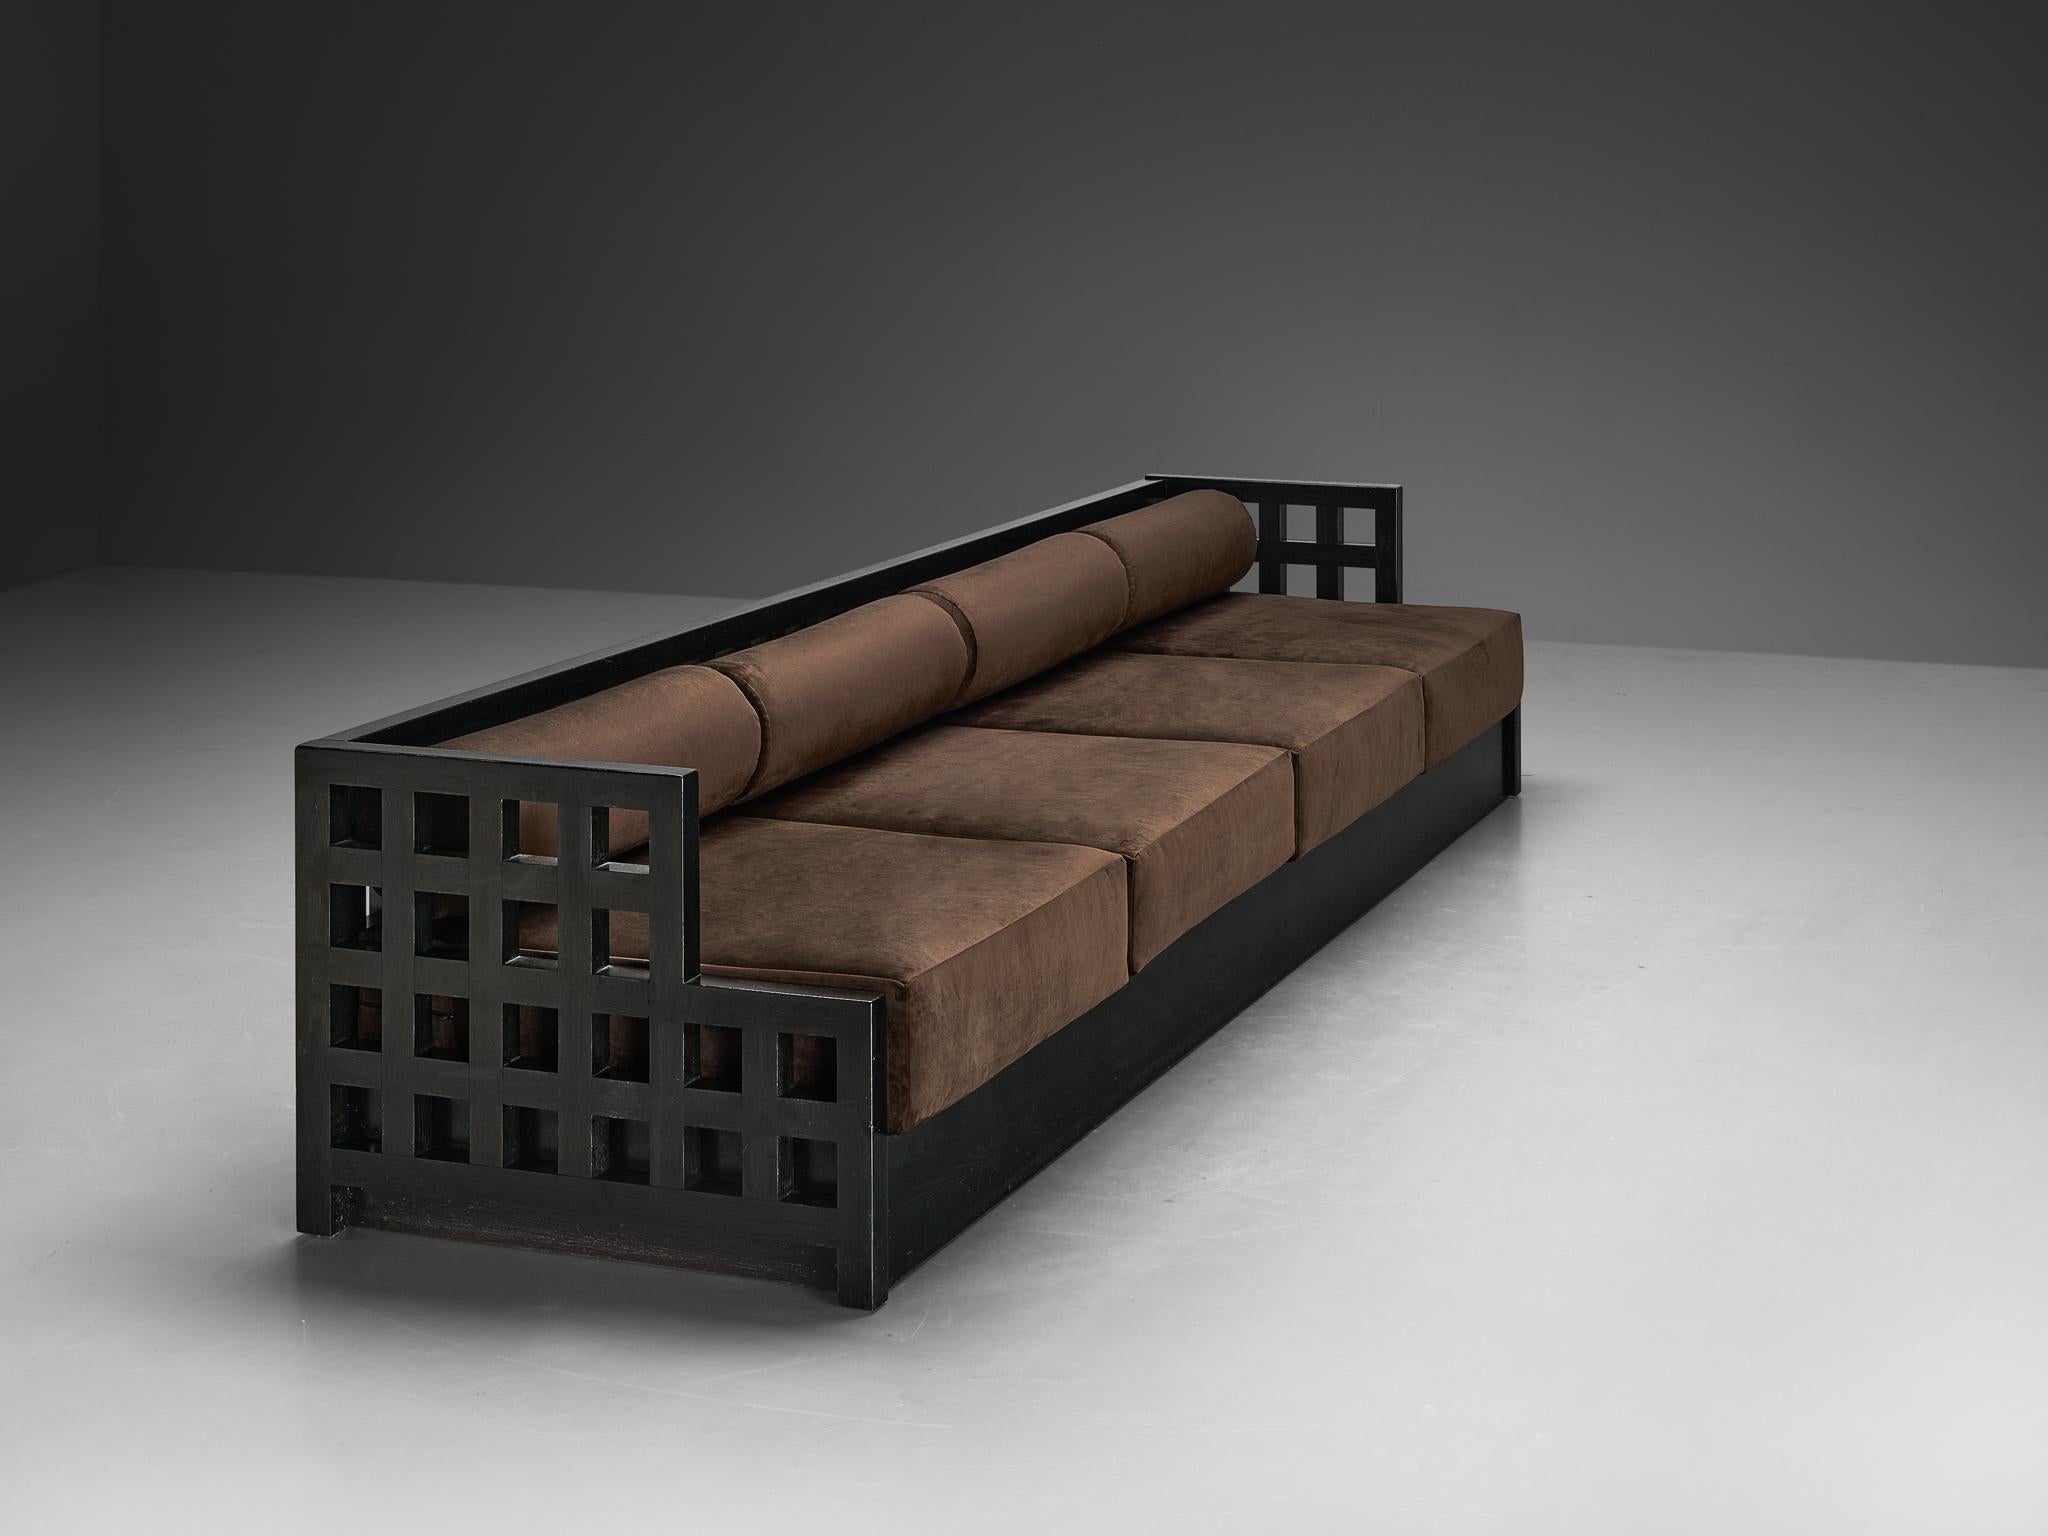 Sofa, lacquered ash, velvet, Europe, 1980s

A visually striking sofa executed in black lacquered ash, its clear geometric structure commands attention, defined by a meticulously arranged grid layout with angular shapes and square apertures. Its